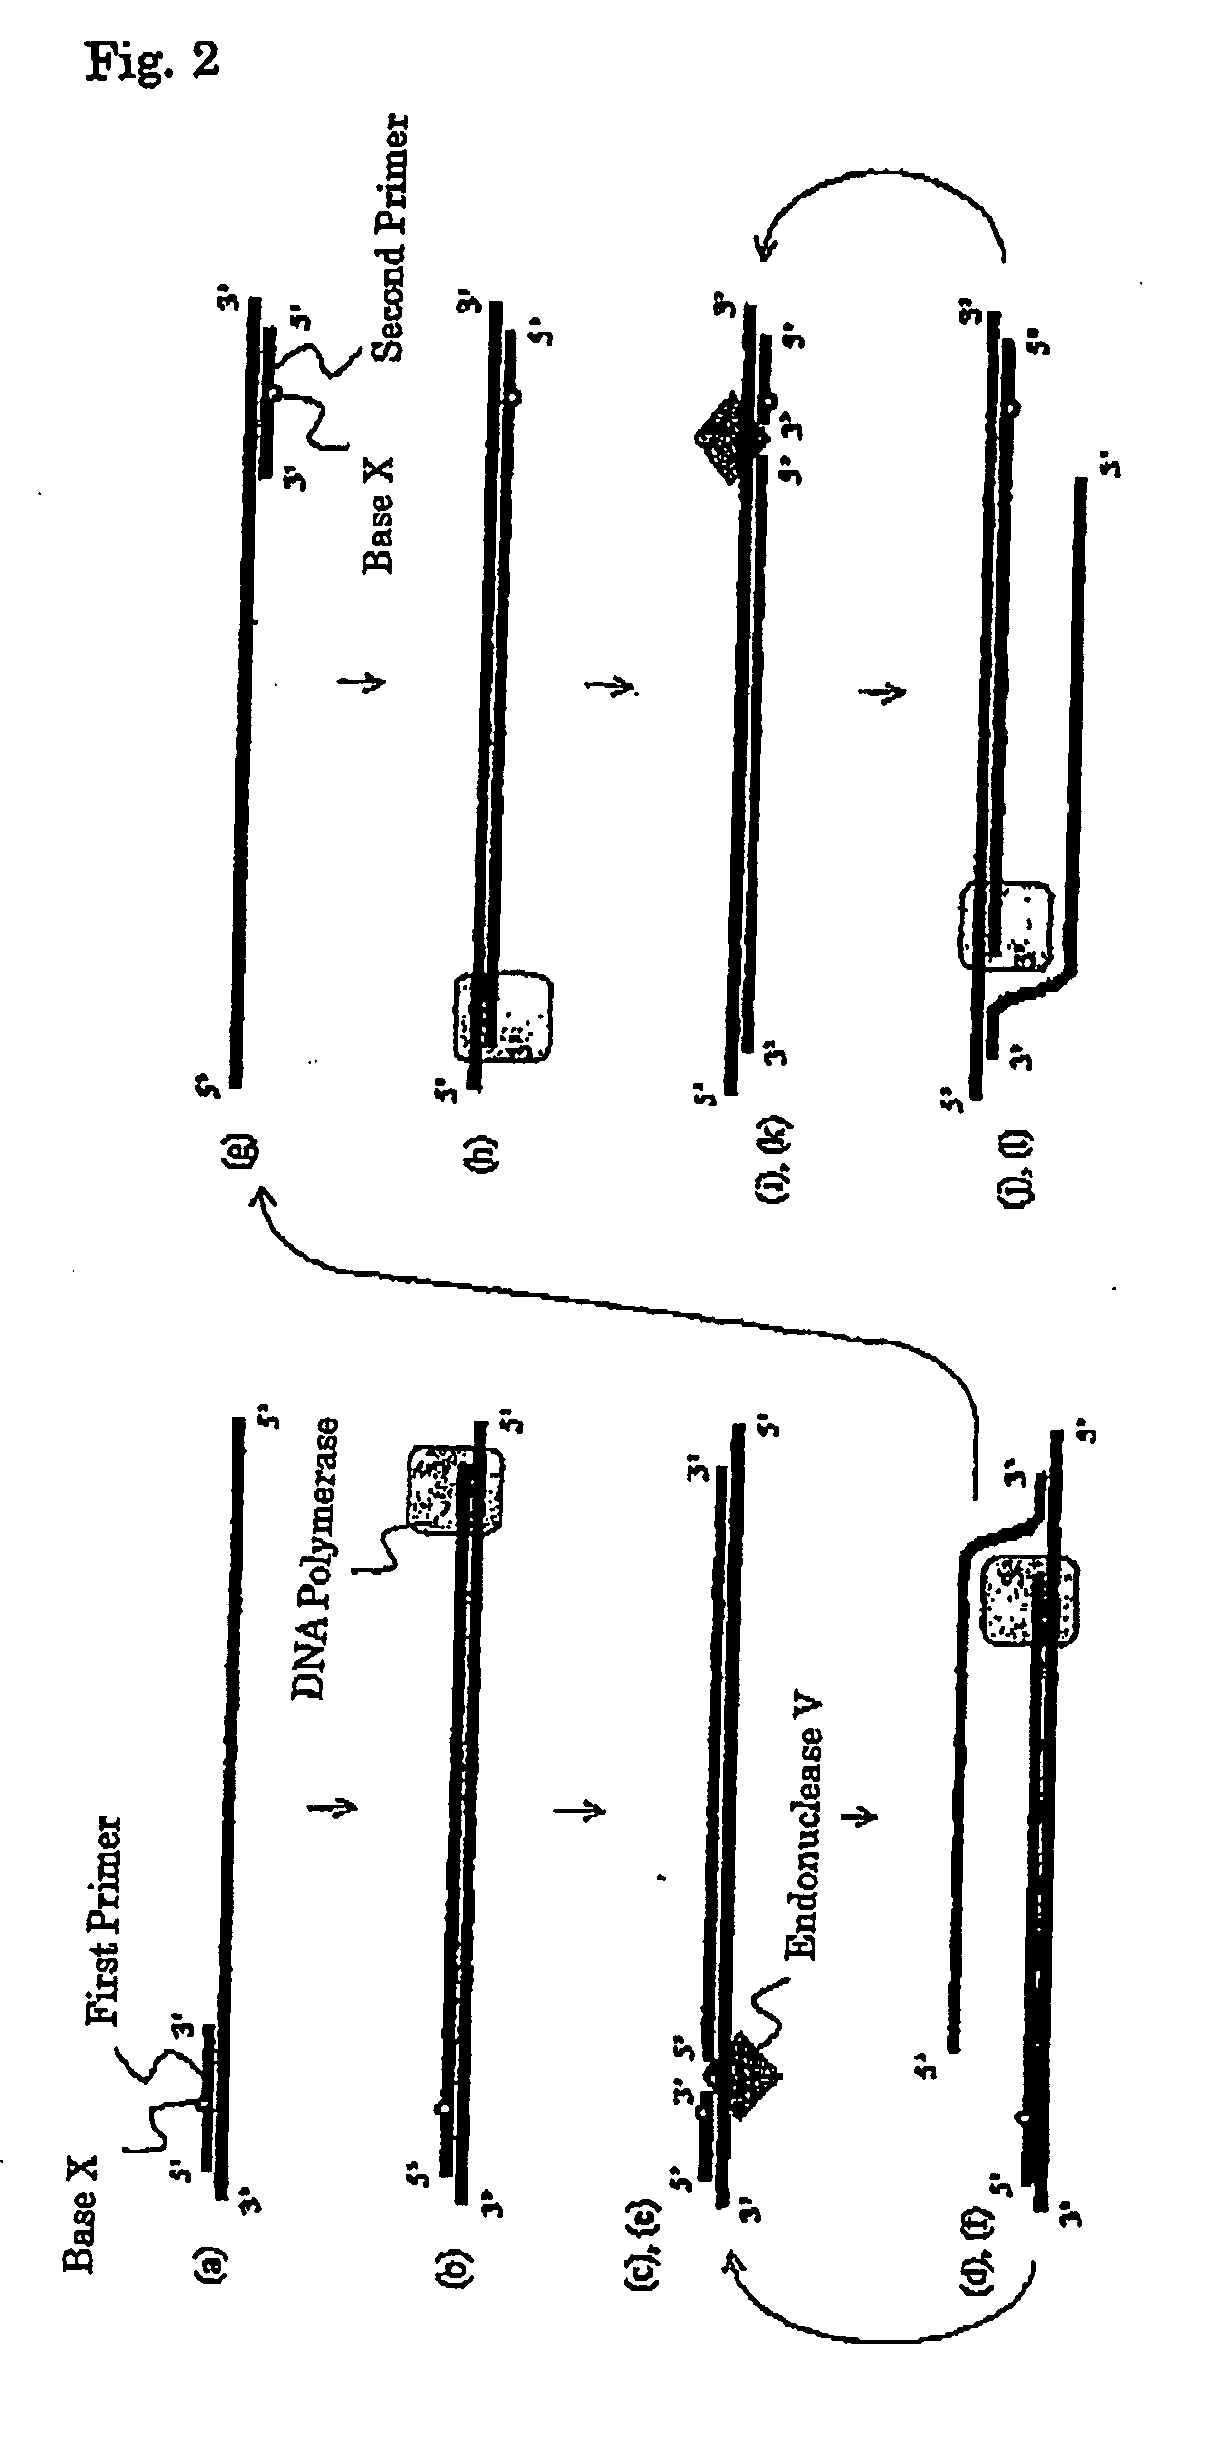 Method for amplification of nucleotide sequence